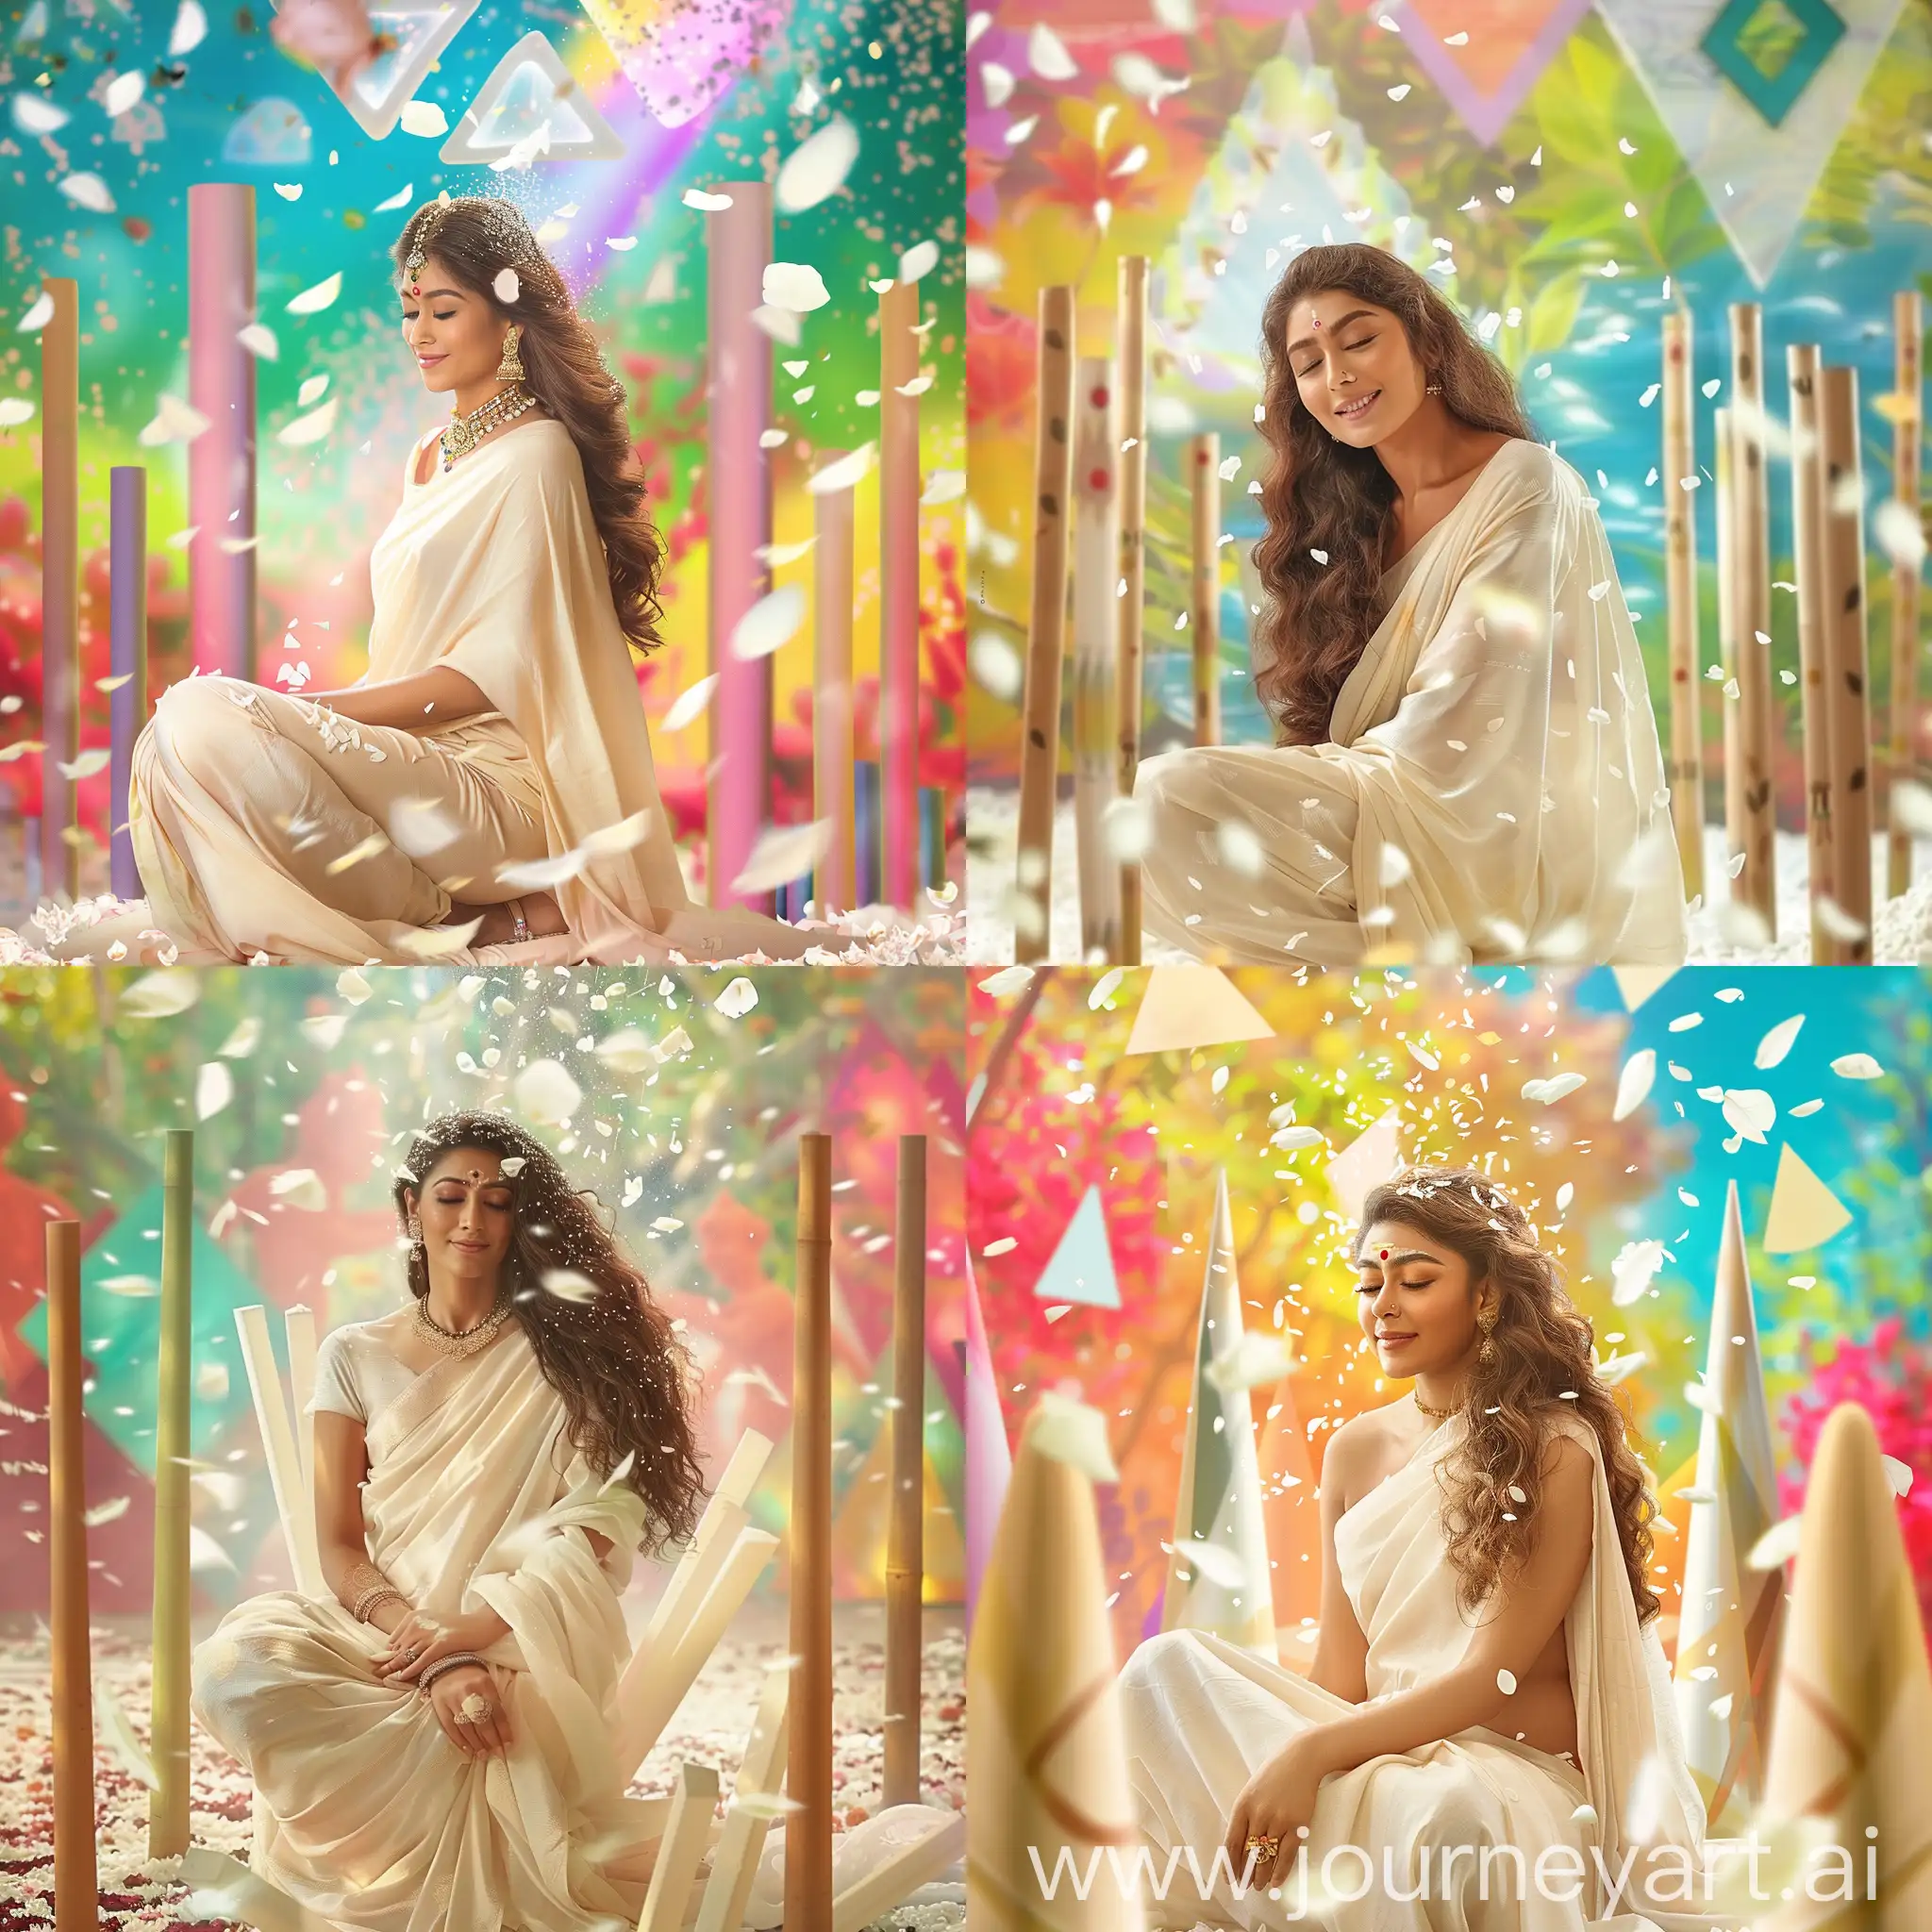 Tranquil-Nayanthara-in-OffWhite-Saree-Amid-Sacred-Grove-Showered-with-Petals